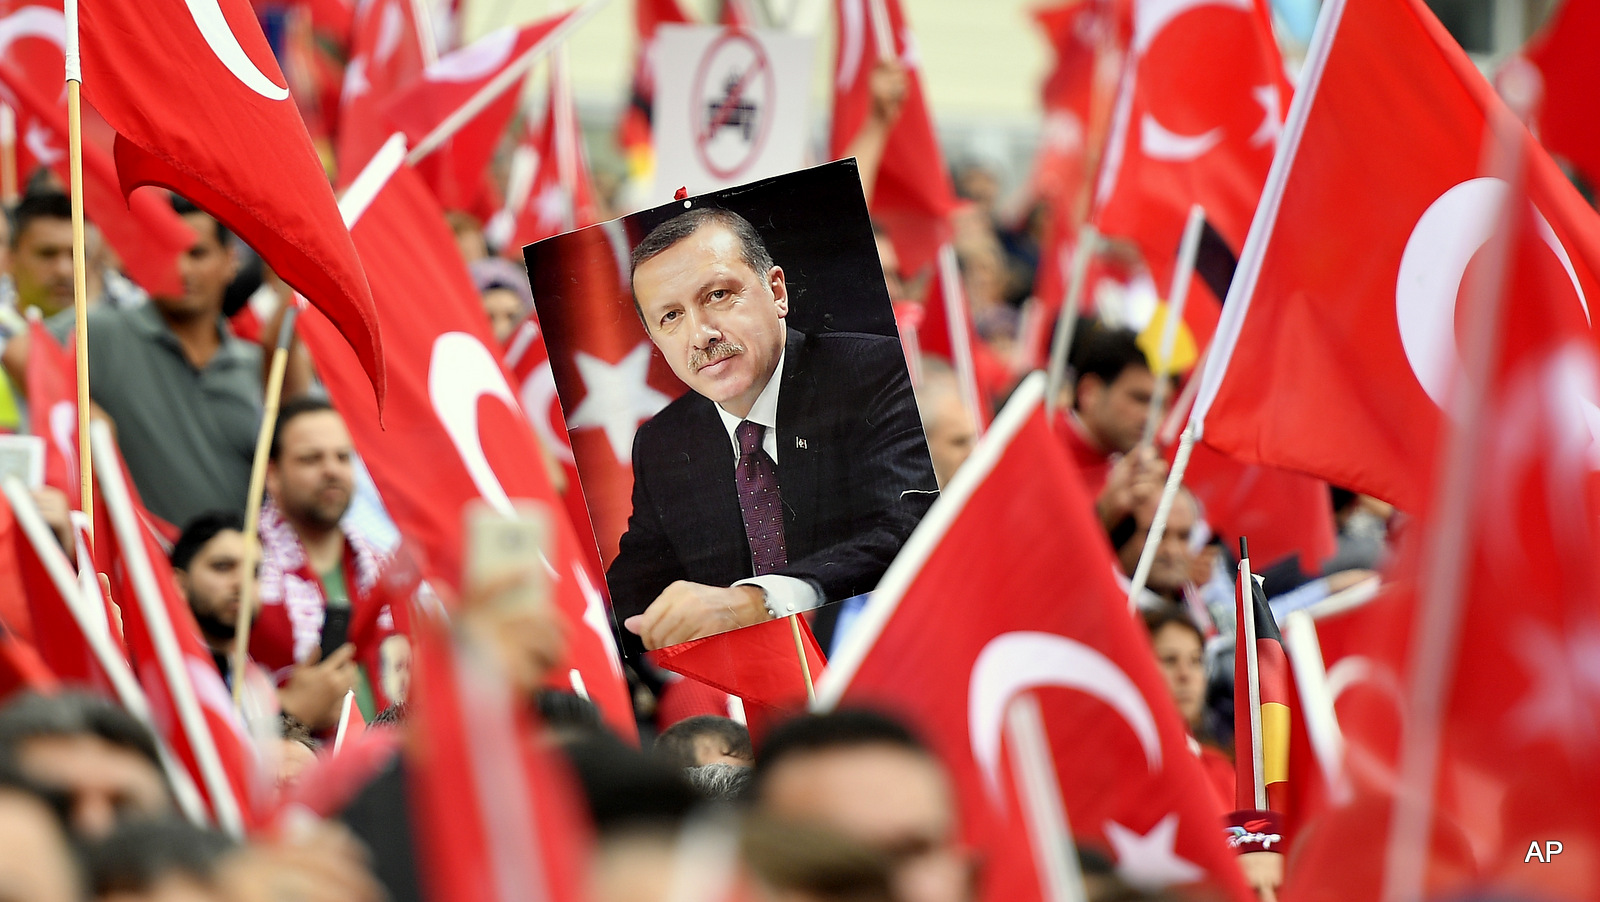 A picture of Turkish president Erdogan is framed by national flags during a demonstration in Cologne, Germany, Sunday, July 31, 2016. Thousands of supporters of Turkish President Recep Tayyip Erdogan have gathered in the German city of Cologne for a demonstration against the failed July 15 coup in Turkey. (AP Photo/Martin Meissner)